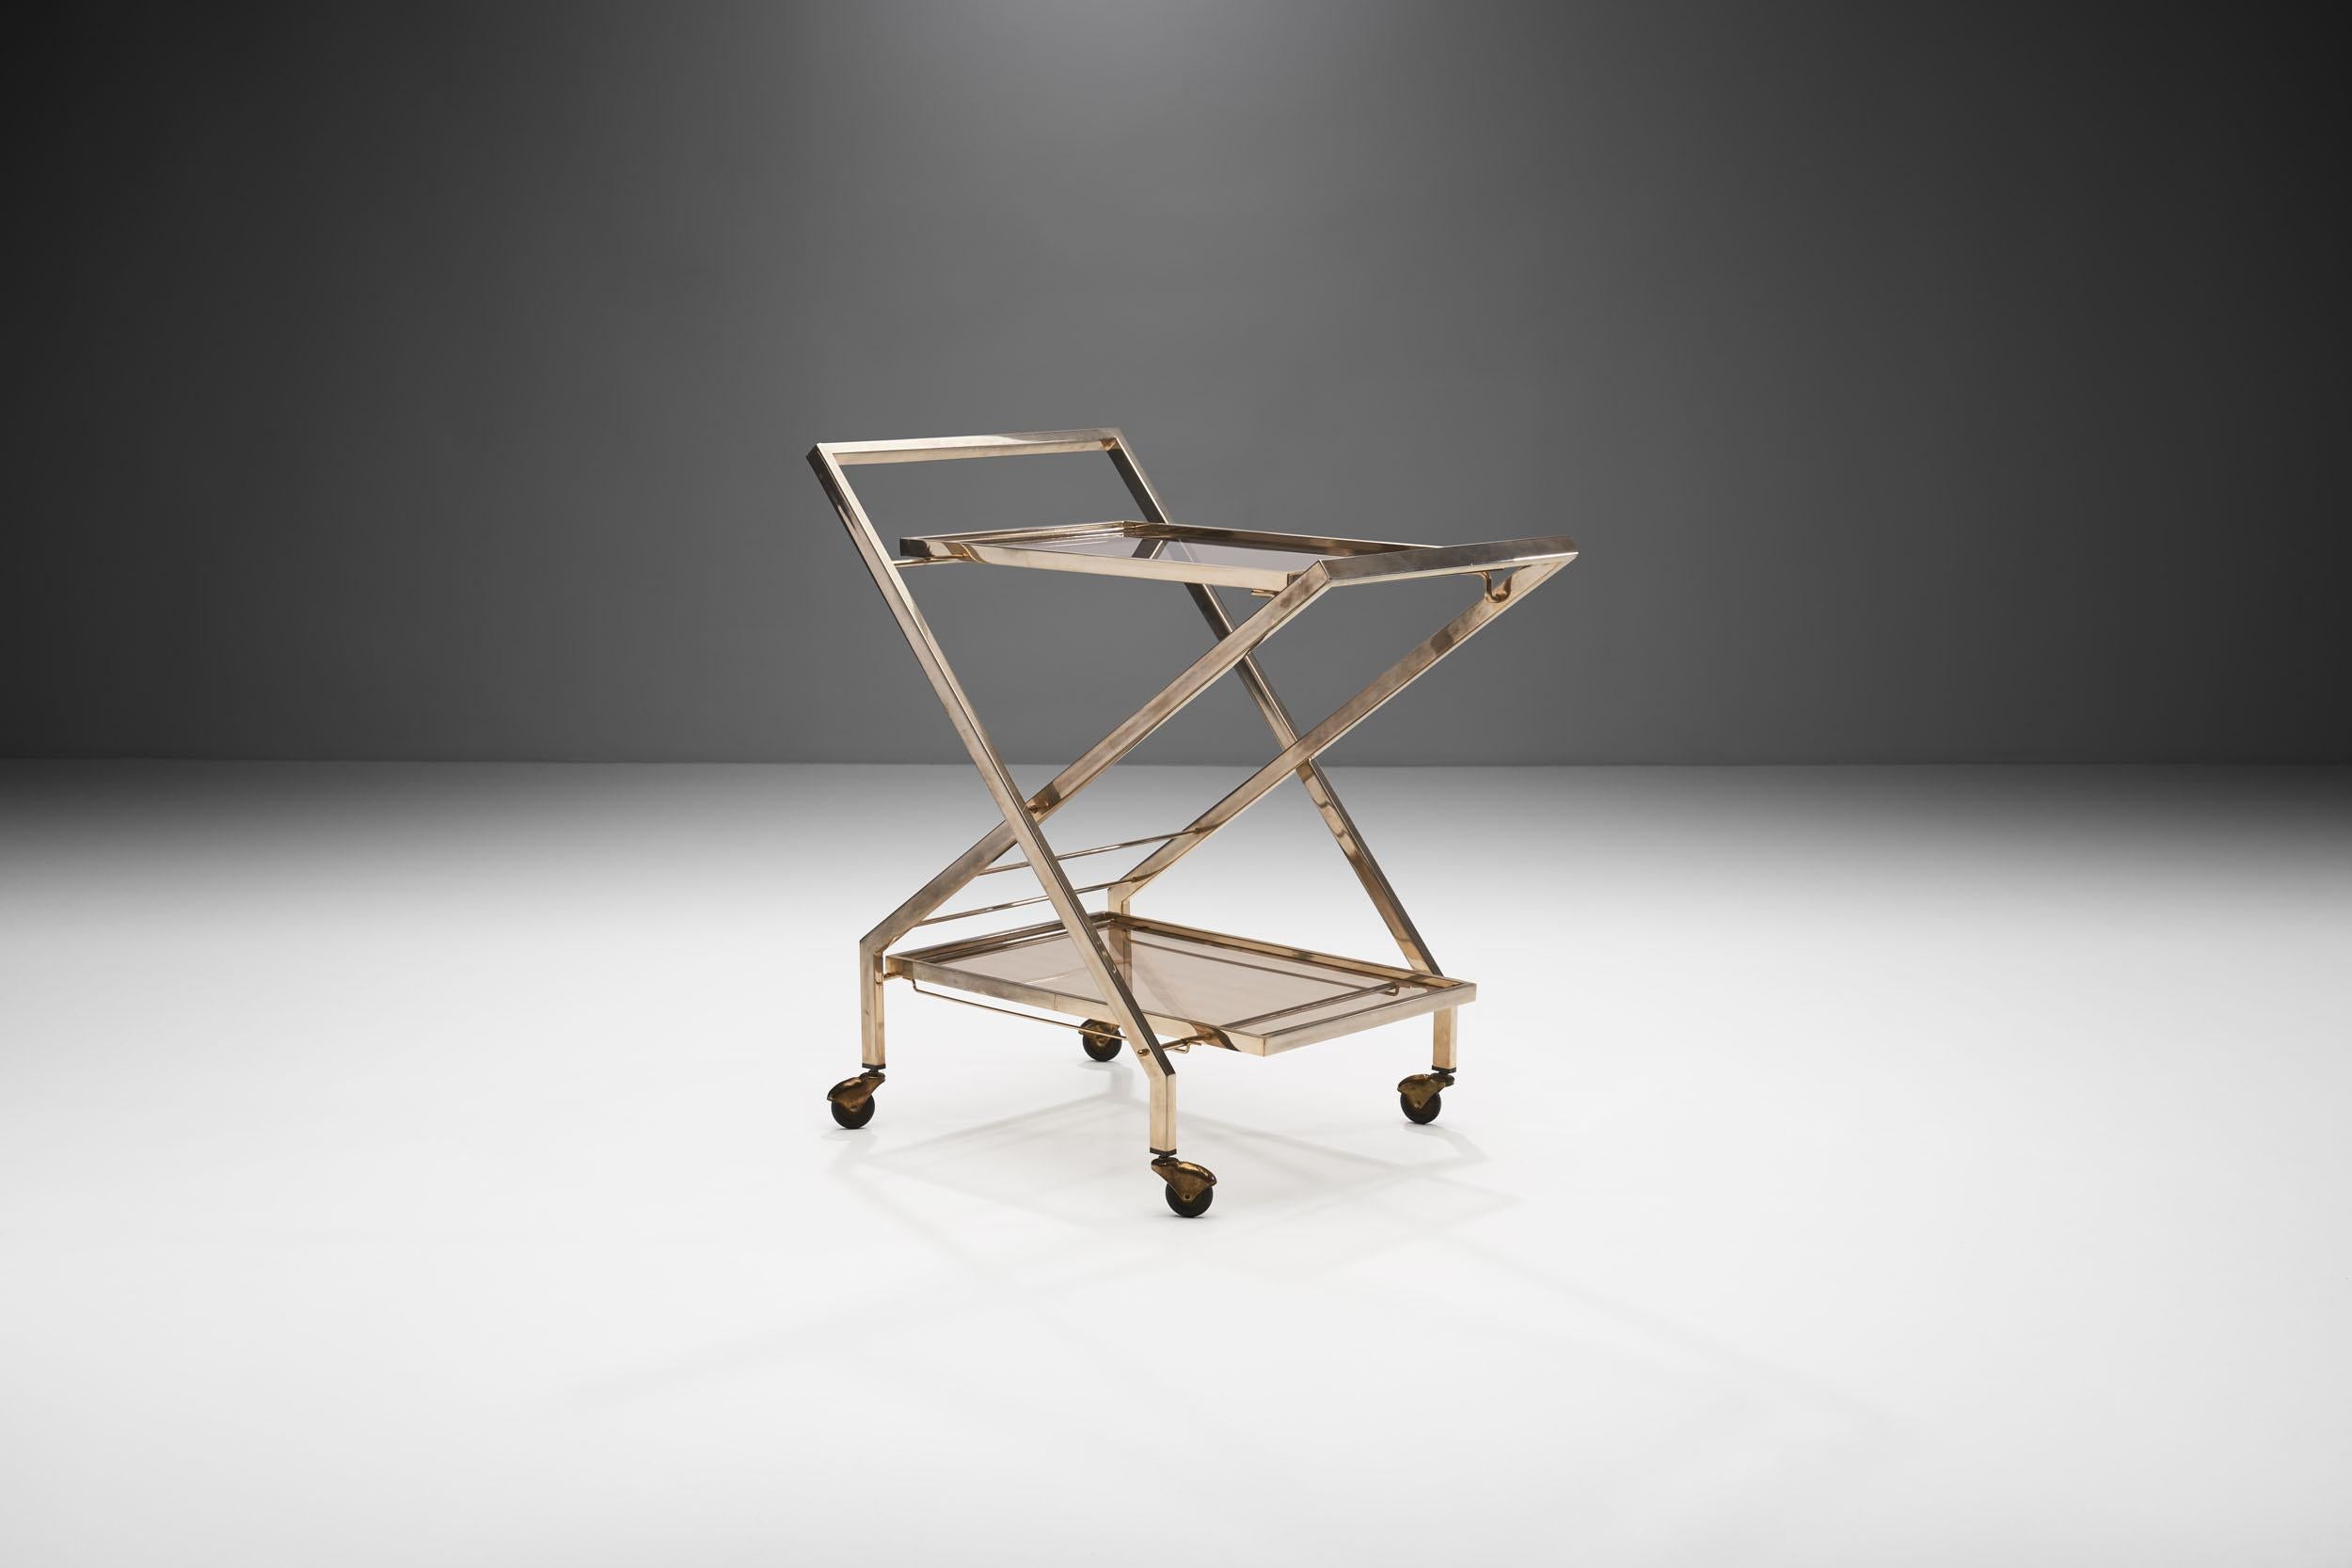 This Mid-Century Modern bar cart is a timeless and elegant piece, not to mention its functionality, 1960. The pairing of glass and brass is an elegant, modern combination of materials.

The two-tiered construction recalls the brass carts of the